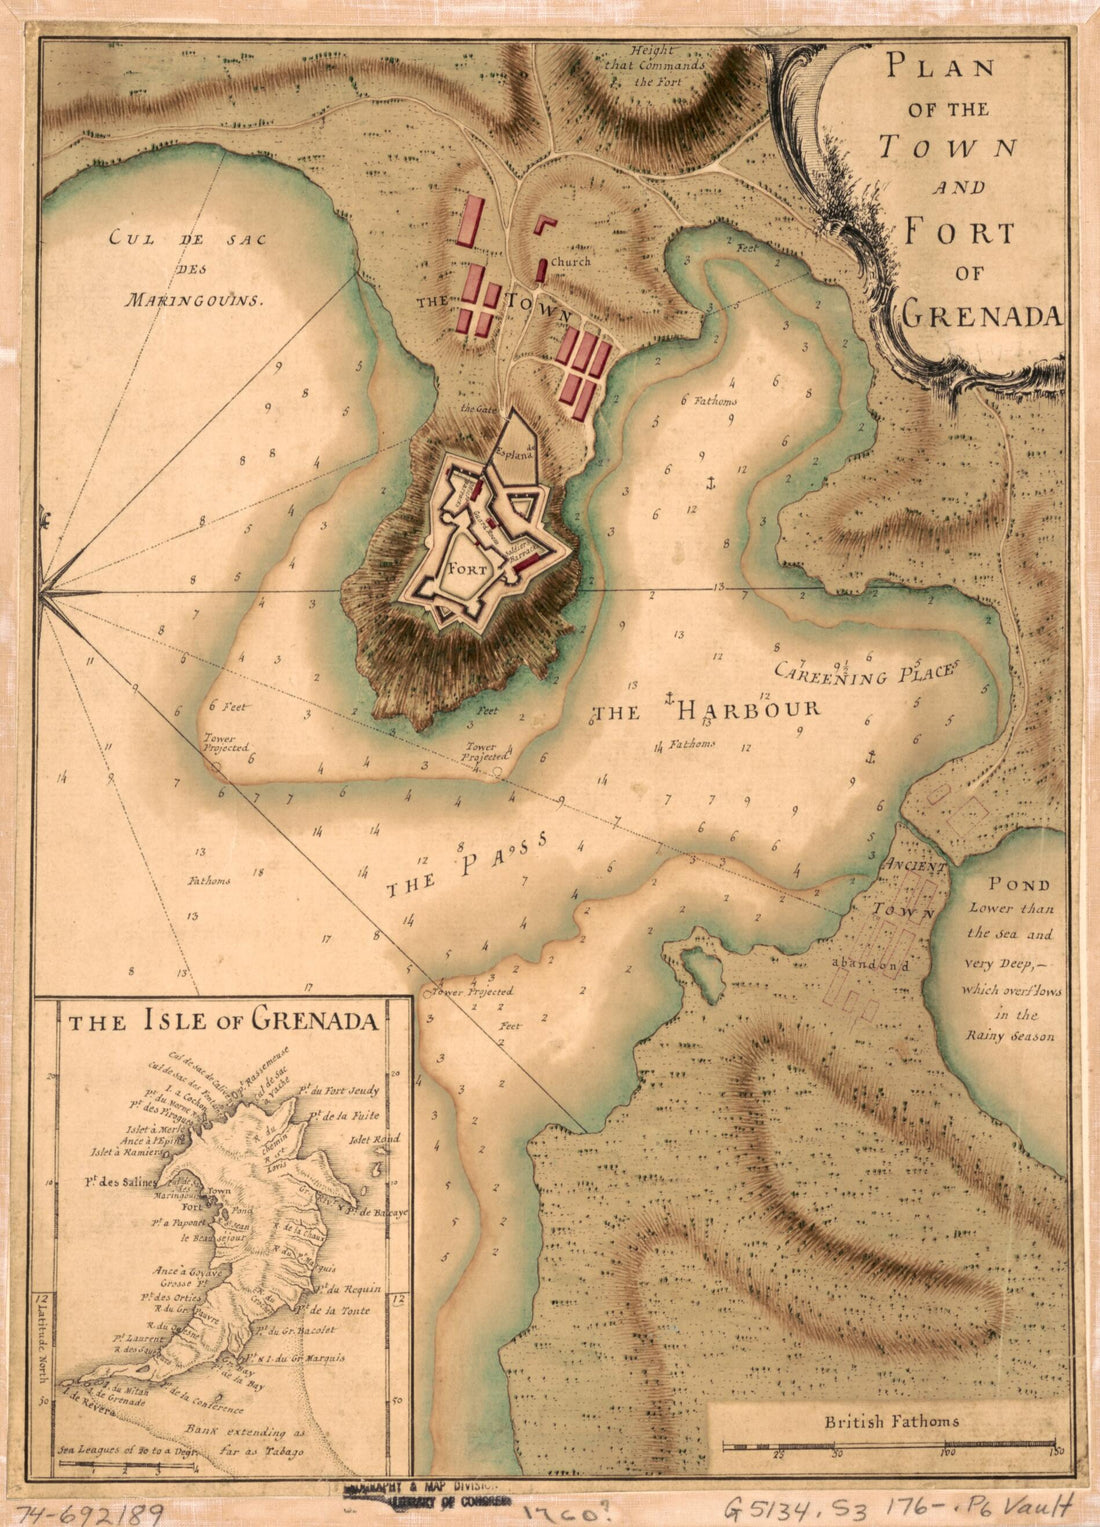 This old map of Plan of the Town and Fort of Grenada from 1760 was created by  in 1760